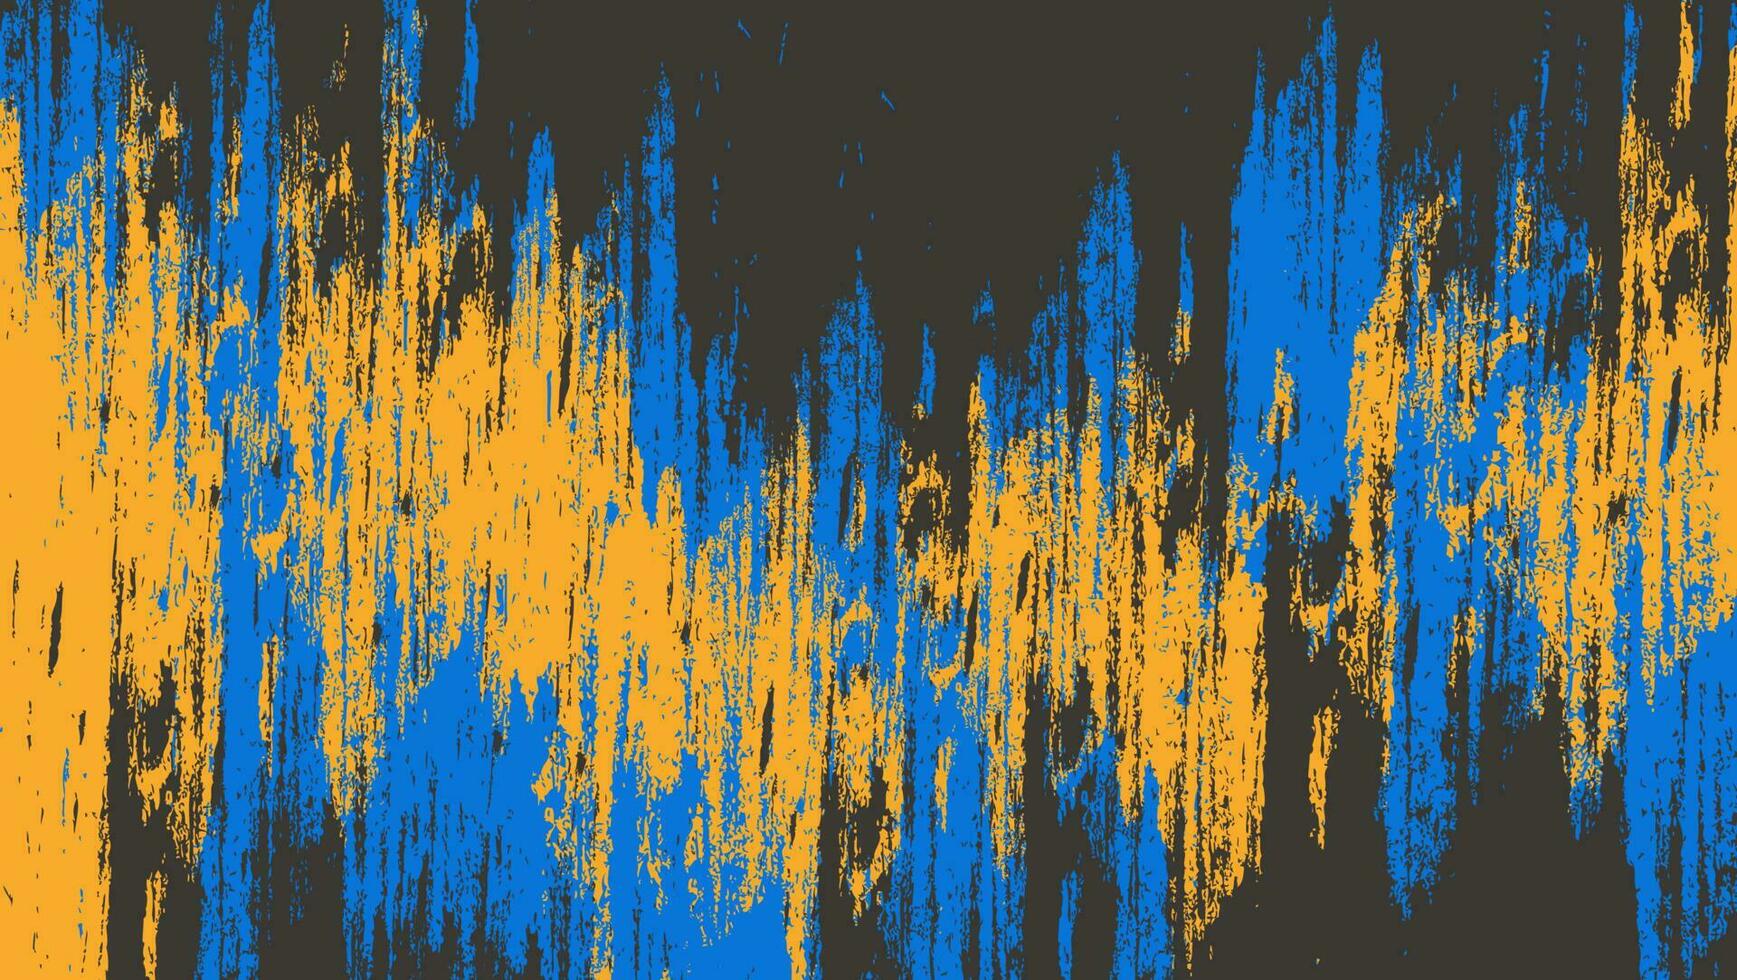 Abstract Yellow Blue Paint Grunge Texture In Black Background Design vector